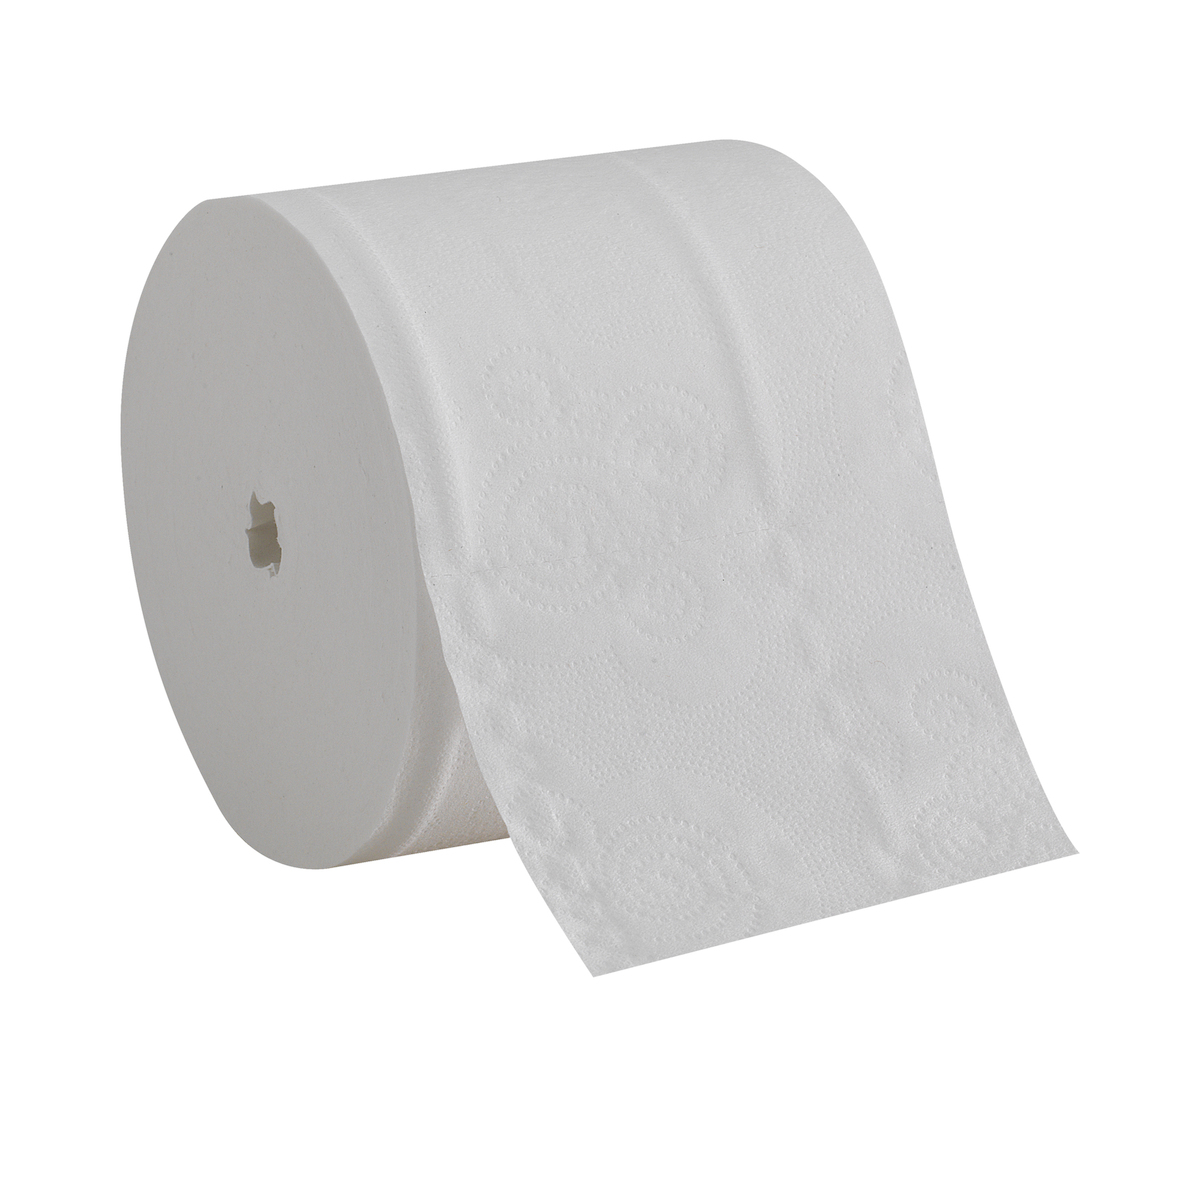 GP Angel Soft Professional Series® Compact® White Coreless 2-Ply Premium Embossed Toilet Paper, 36/750